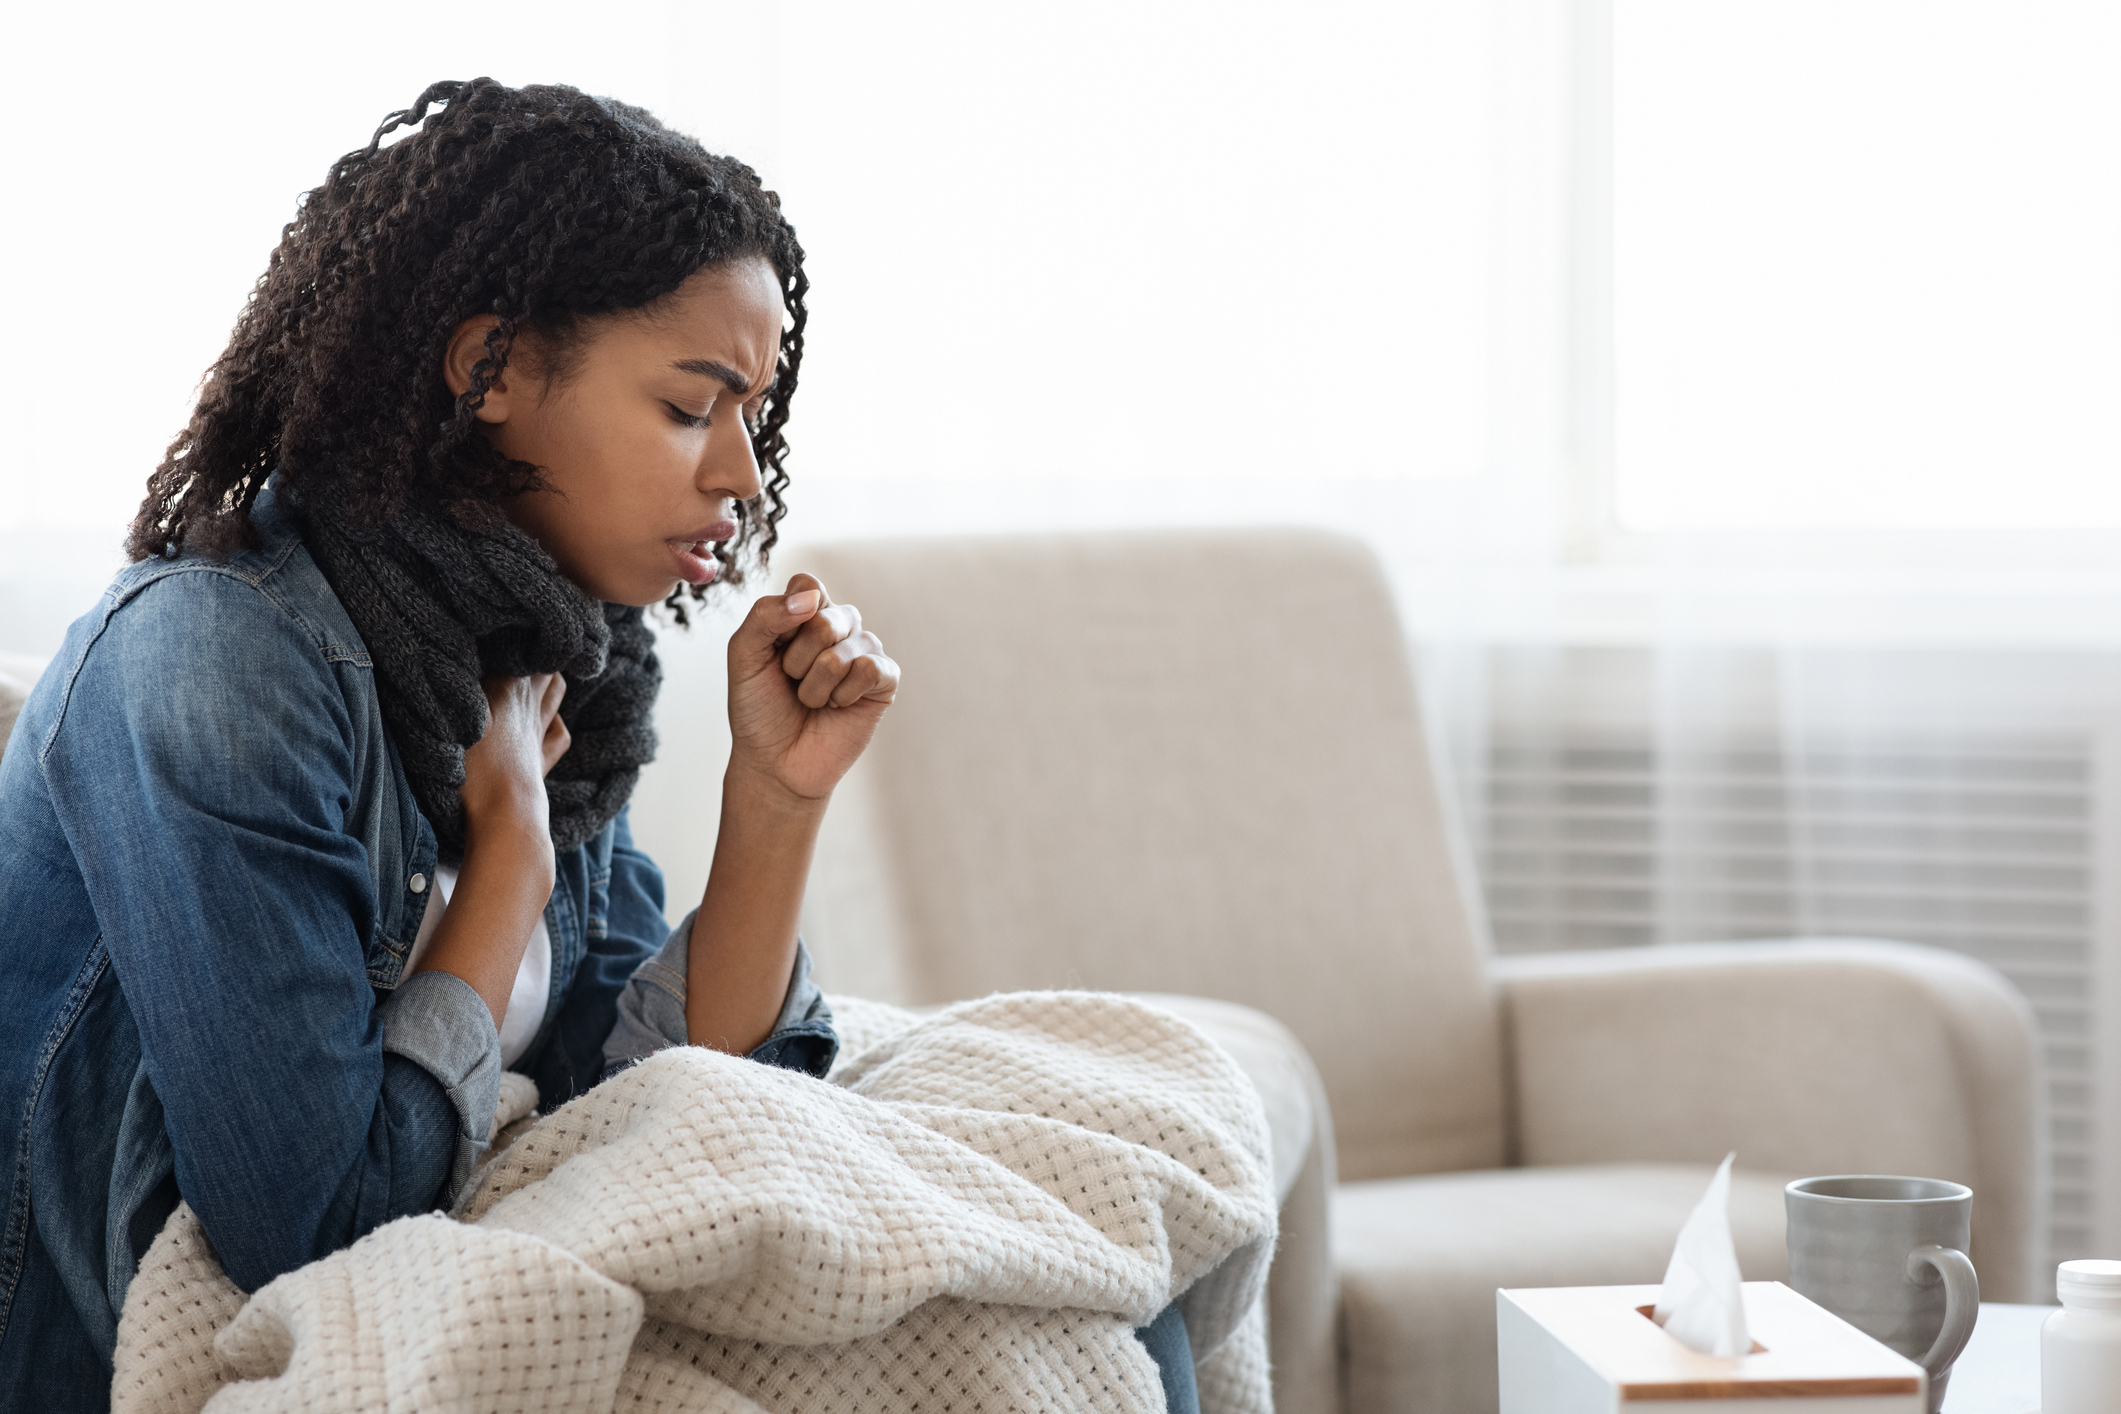 Sick Black Woman Coughing Hard At Home, Sitting On Couch Wearing Scarf And Covered With Blanket, Side View With Copy Space